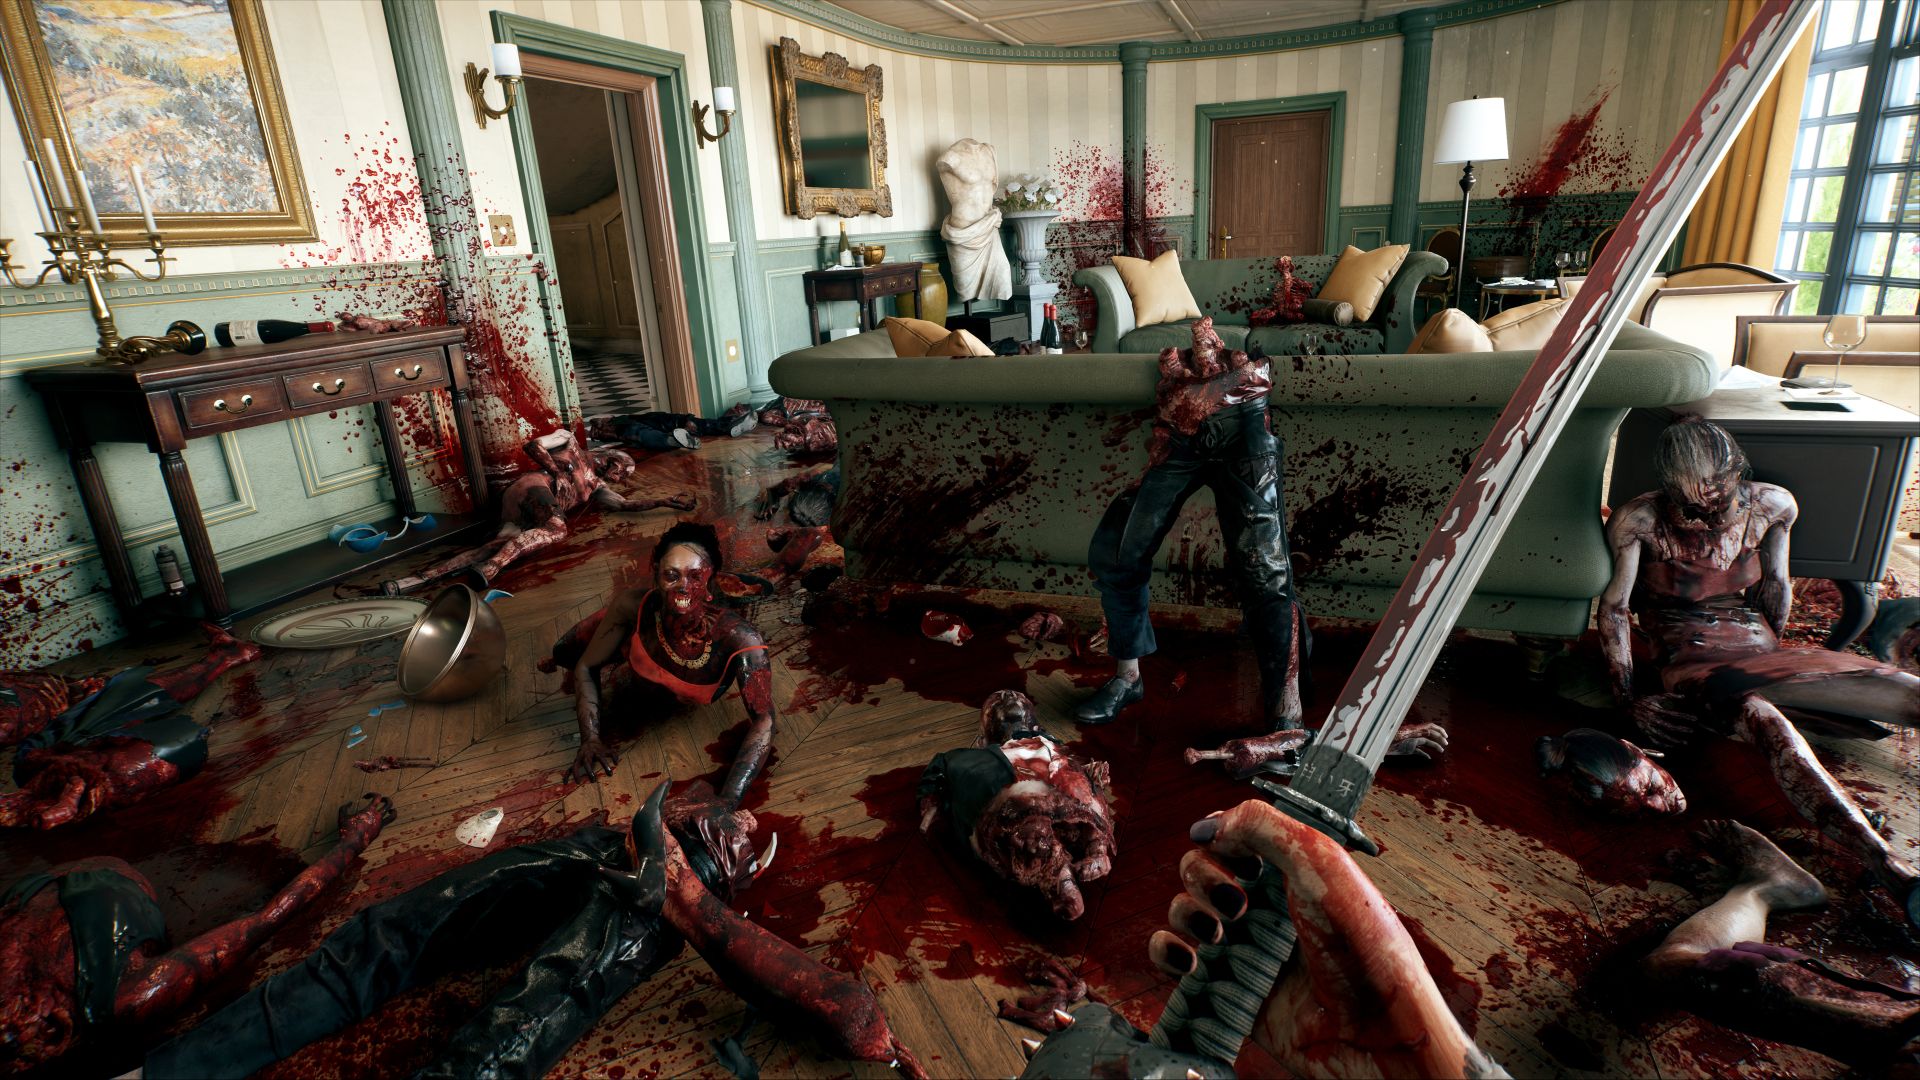 Review: 'Dead Rising 3' a gory, campy zombie adventure